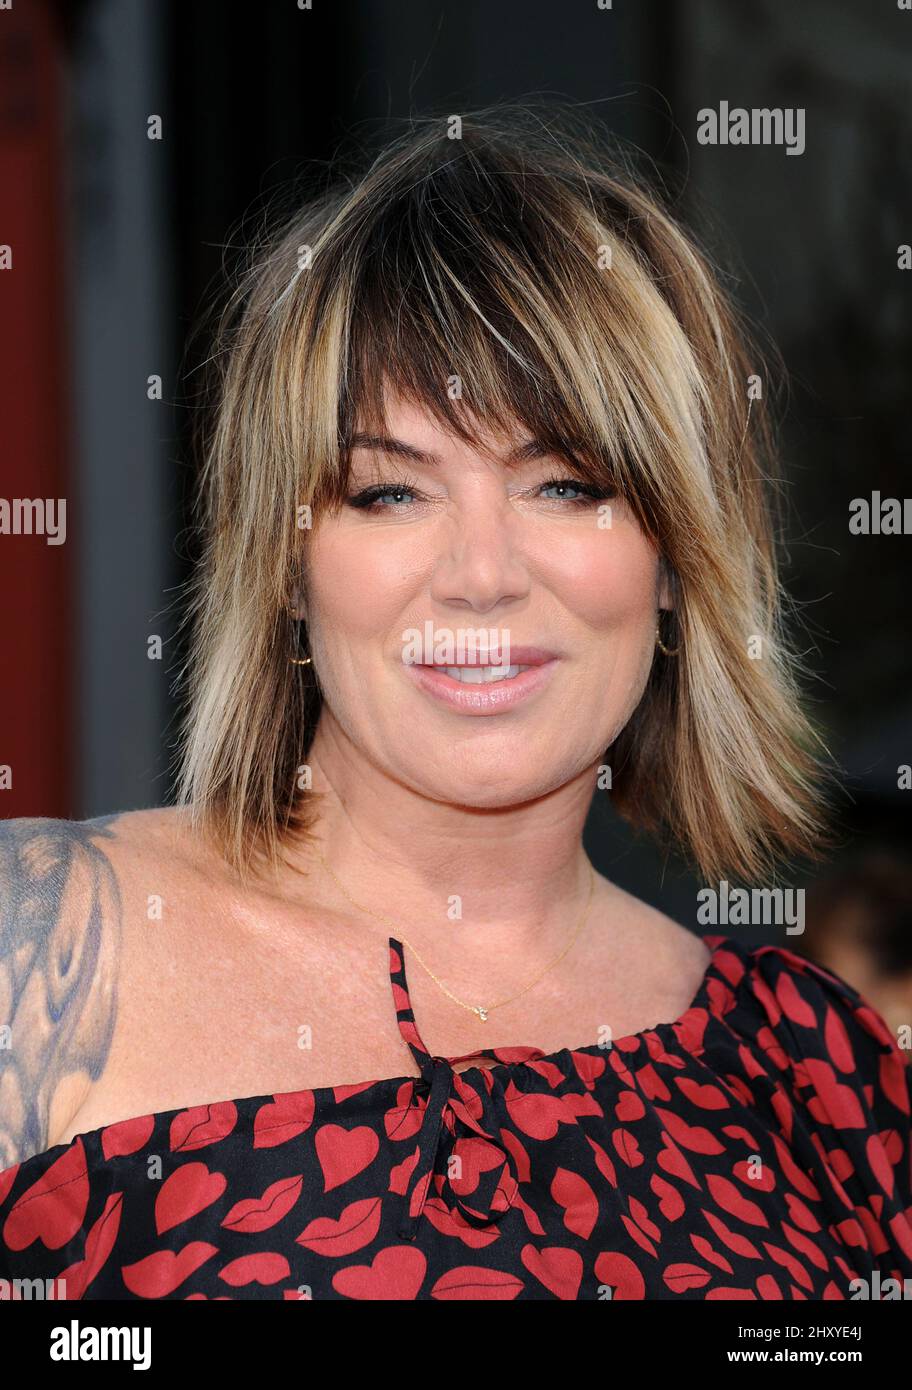 Mia michaels hi-res stock photography and images - Alamy